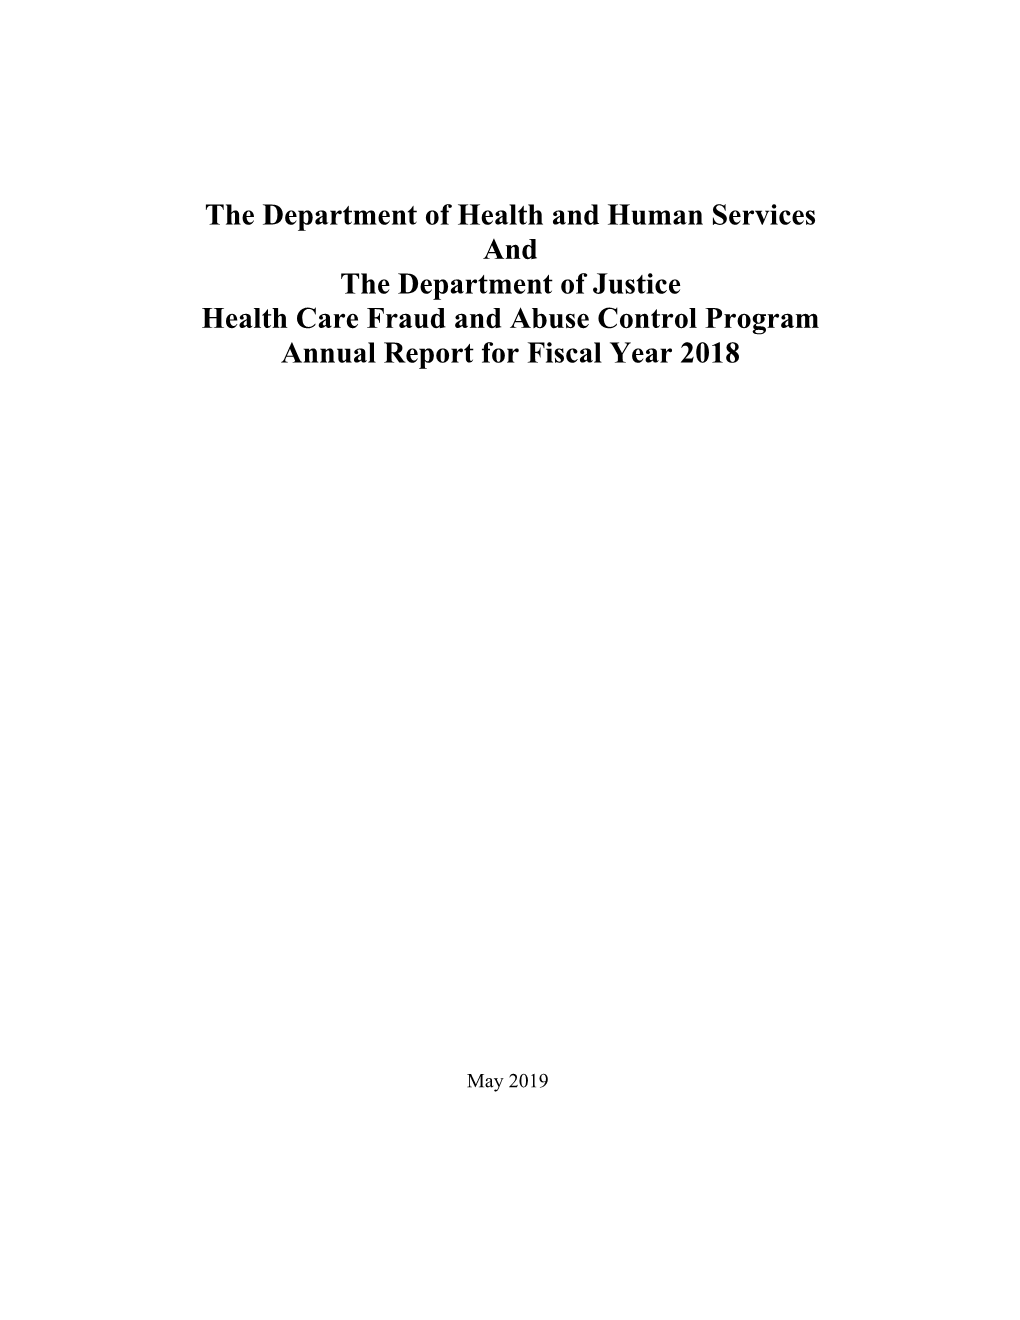 Health Care Fraud and Abuse Control (HCFAC) Program Annual Report